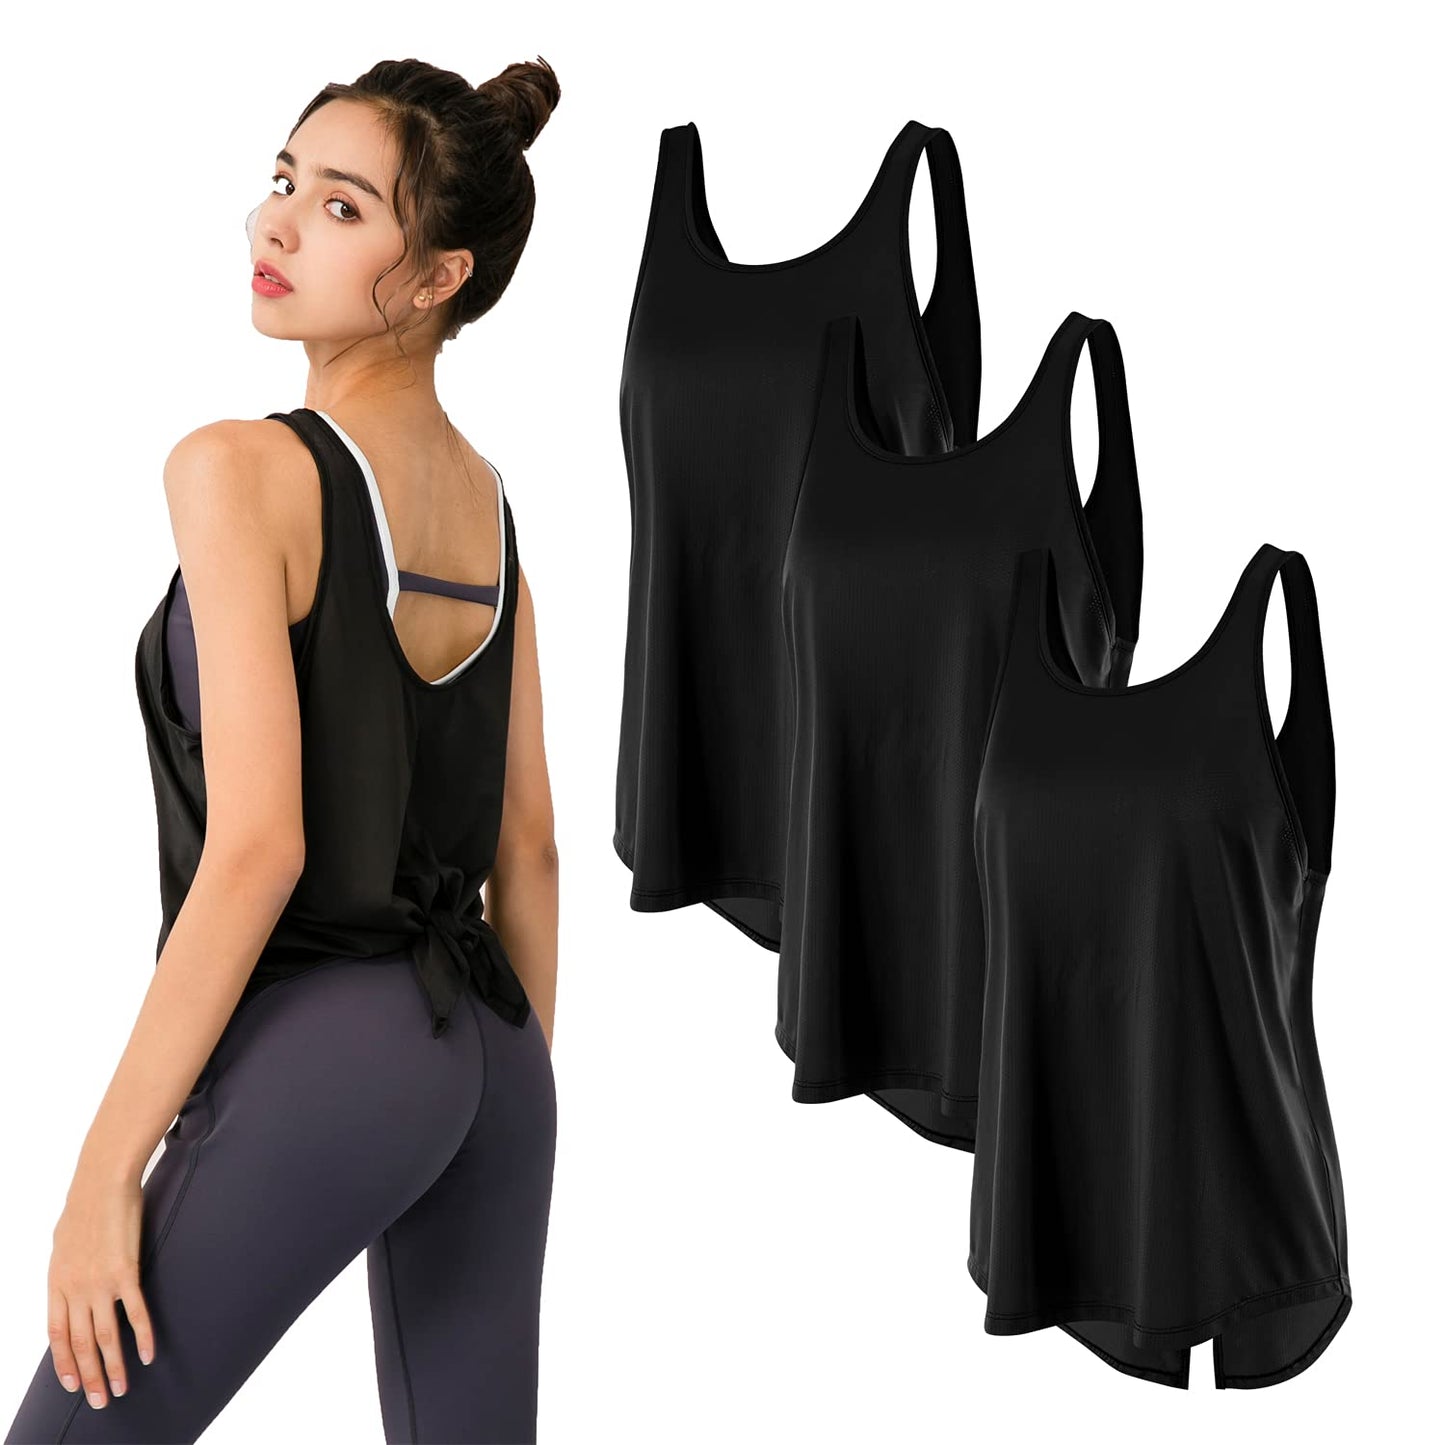  Long Workout Tank Tops Gym Exercise Athletic Yoga